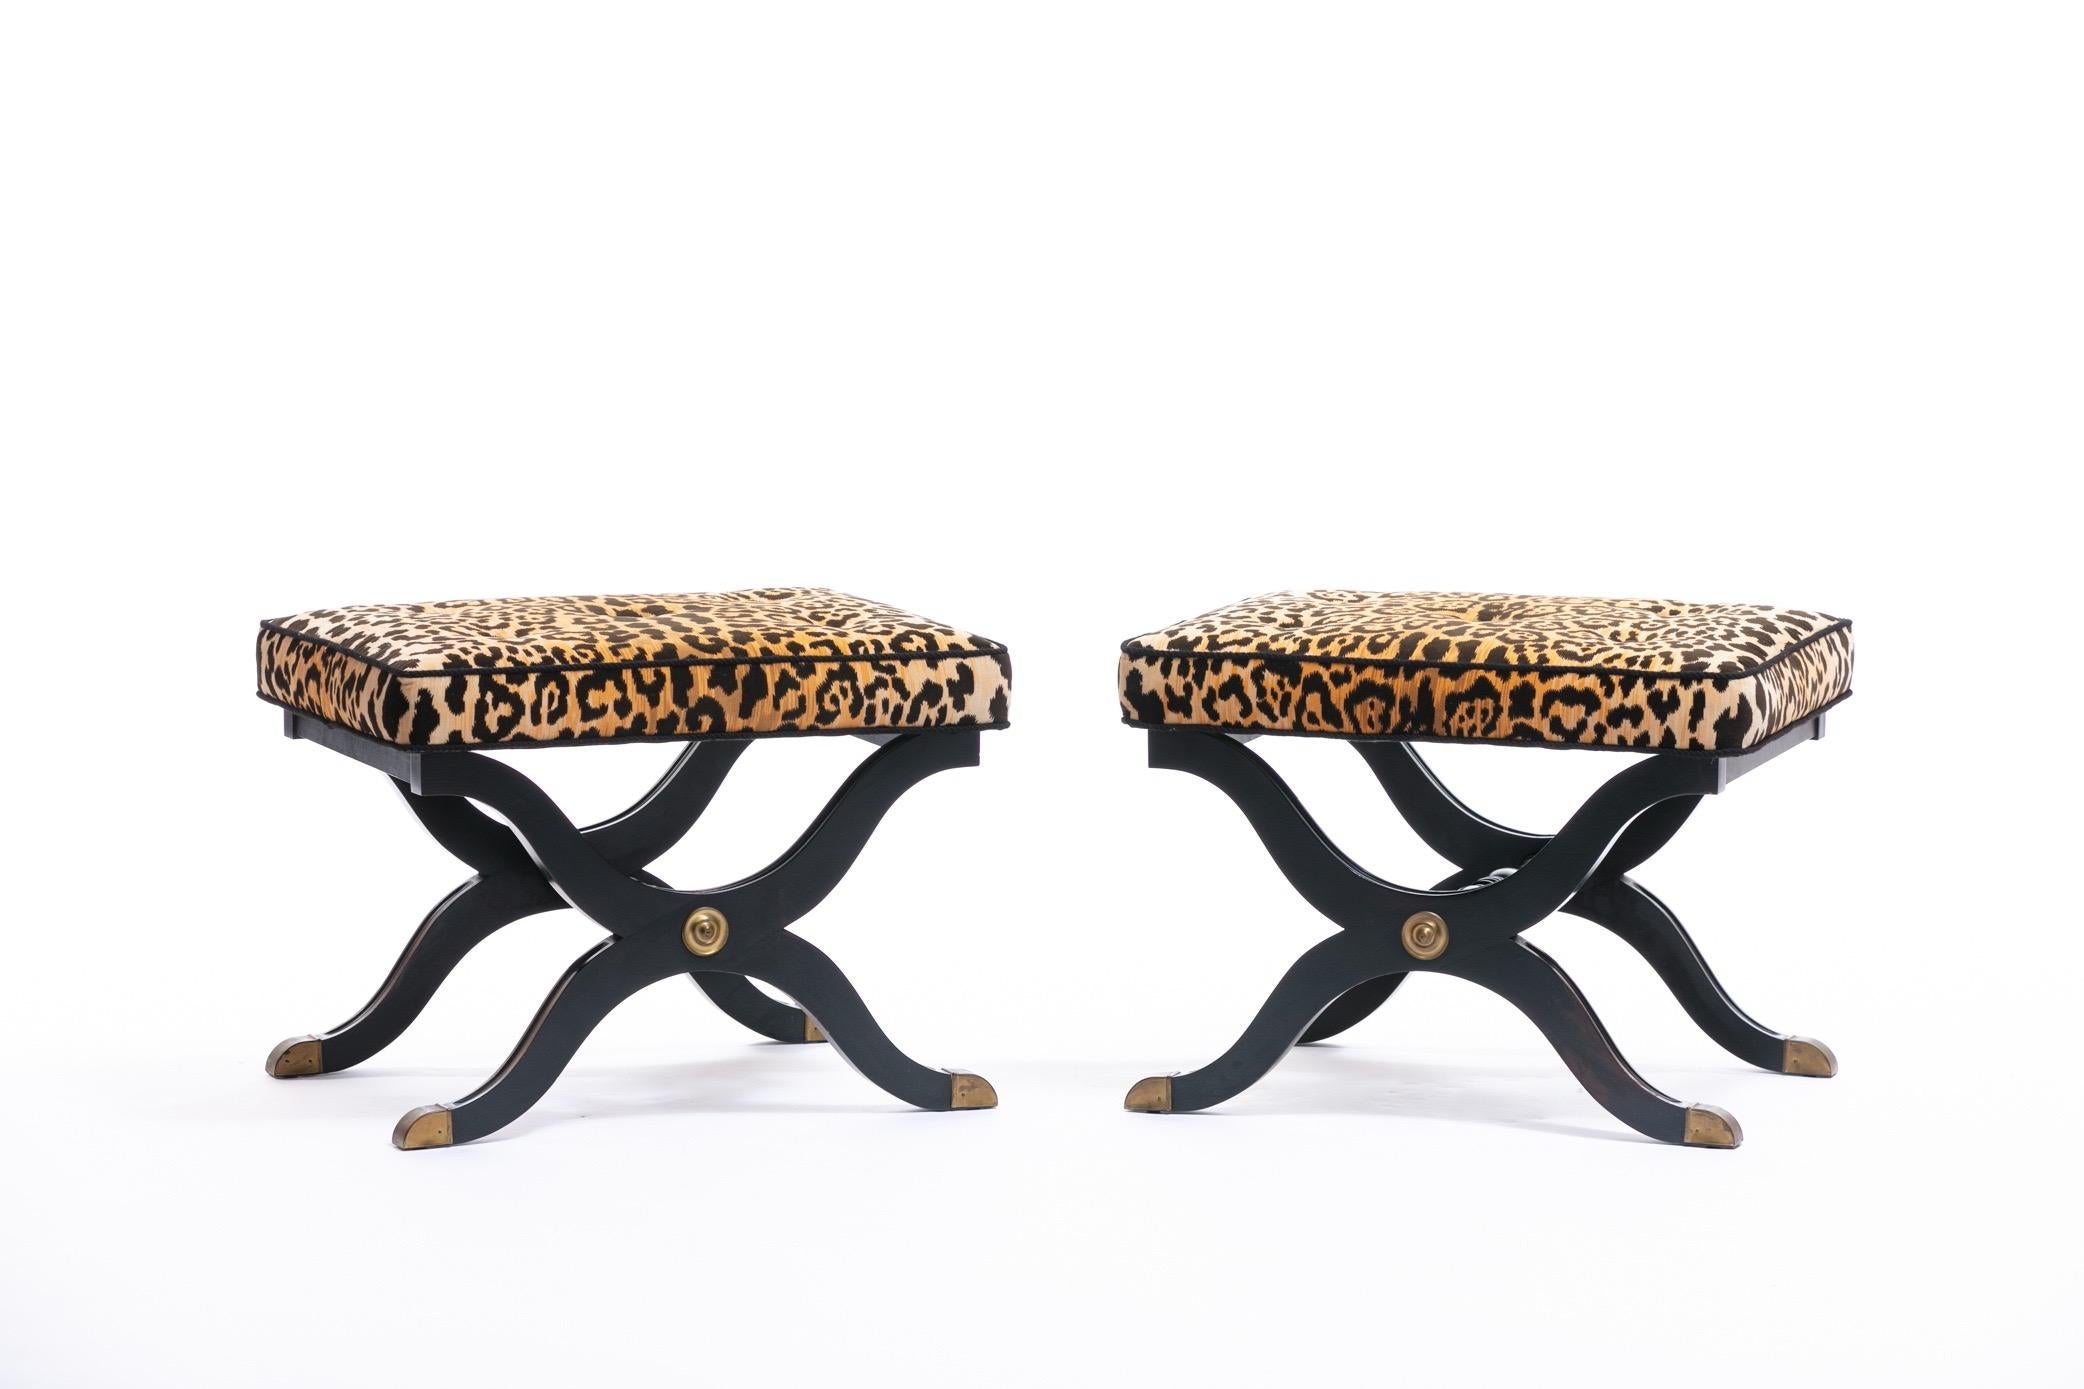 Perfection. Stately and elegant x shape and lines. Brass feet and emblem details. Soft Leopard velvet seat with black tufting and piping detail. These iconic Dorothy Draper stools are timeless. They can be re-imagined in so many ways. It's the type